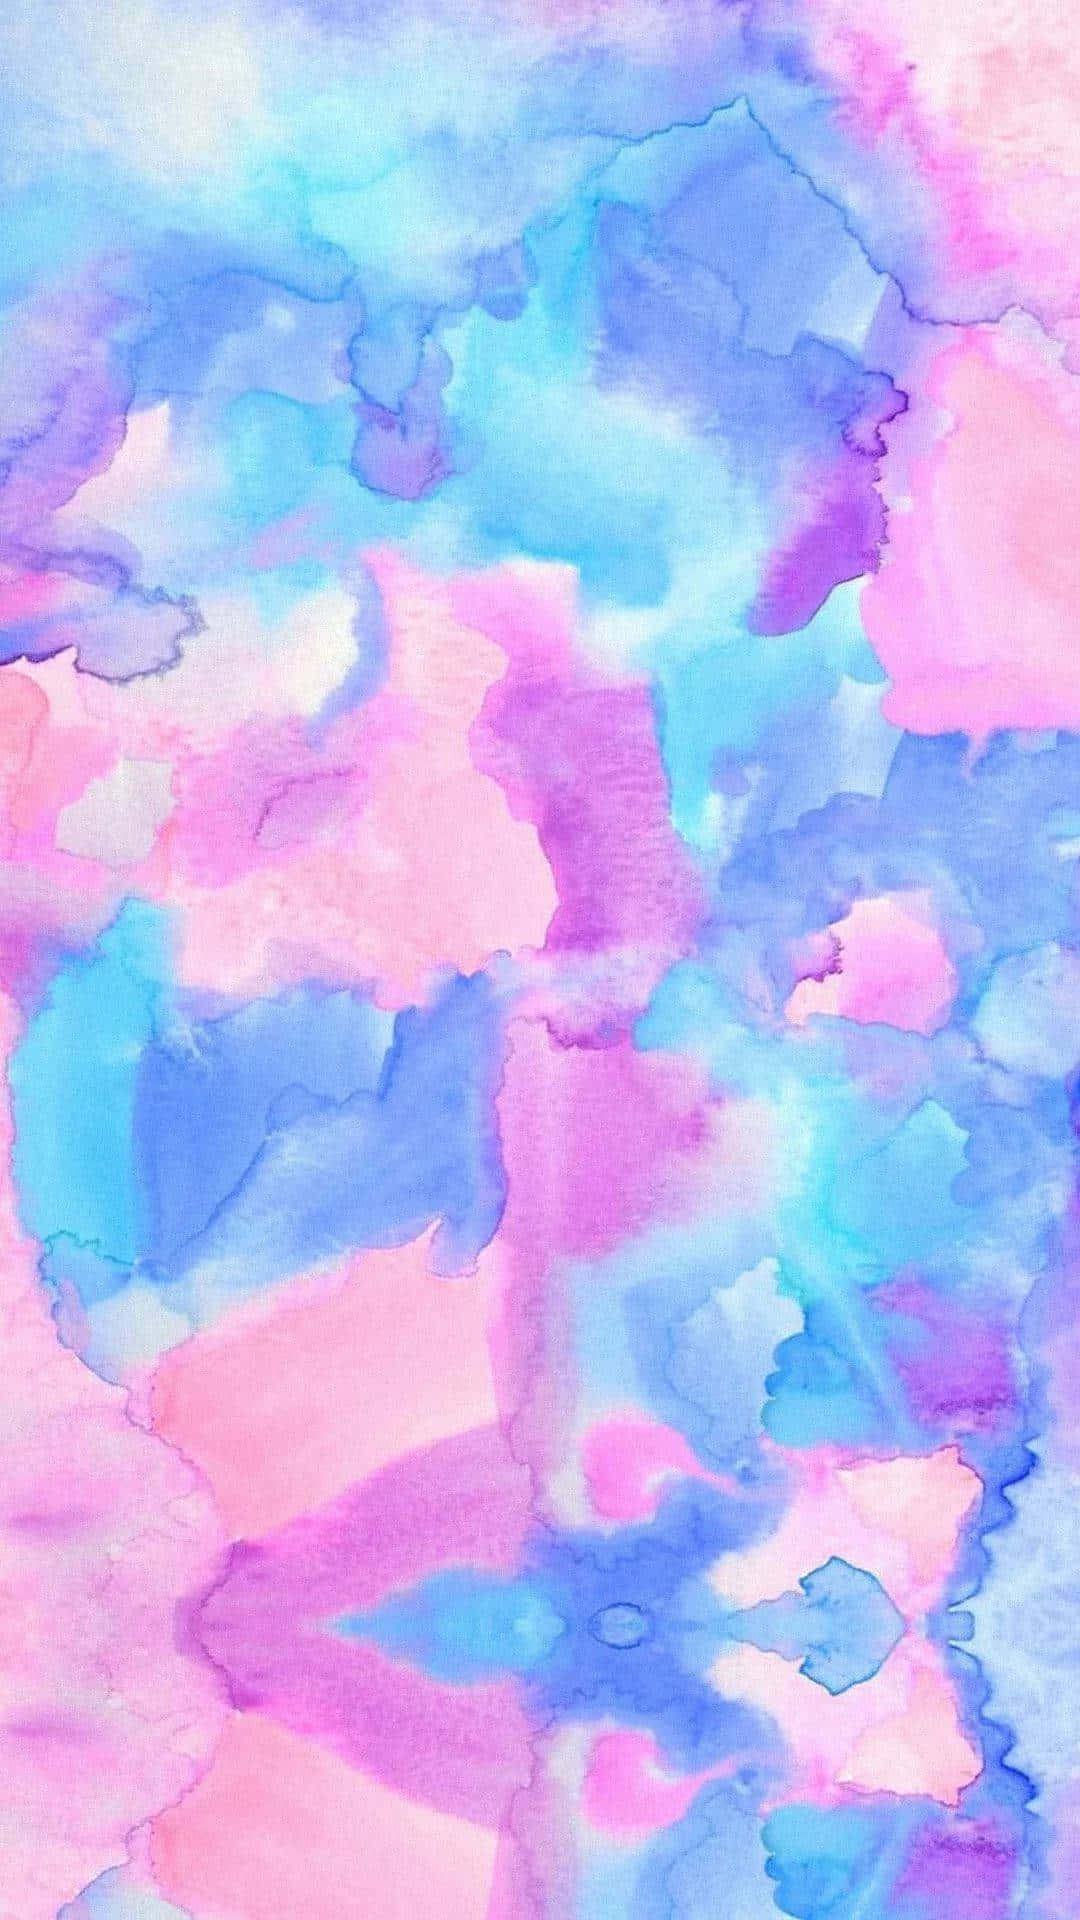 An artsy watercolor painting transforms into an iPhone Wallpaper